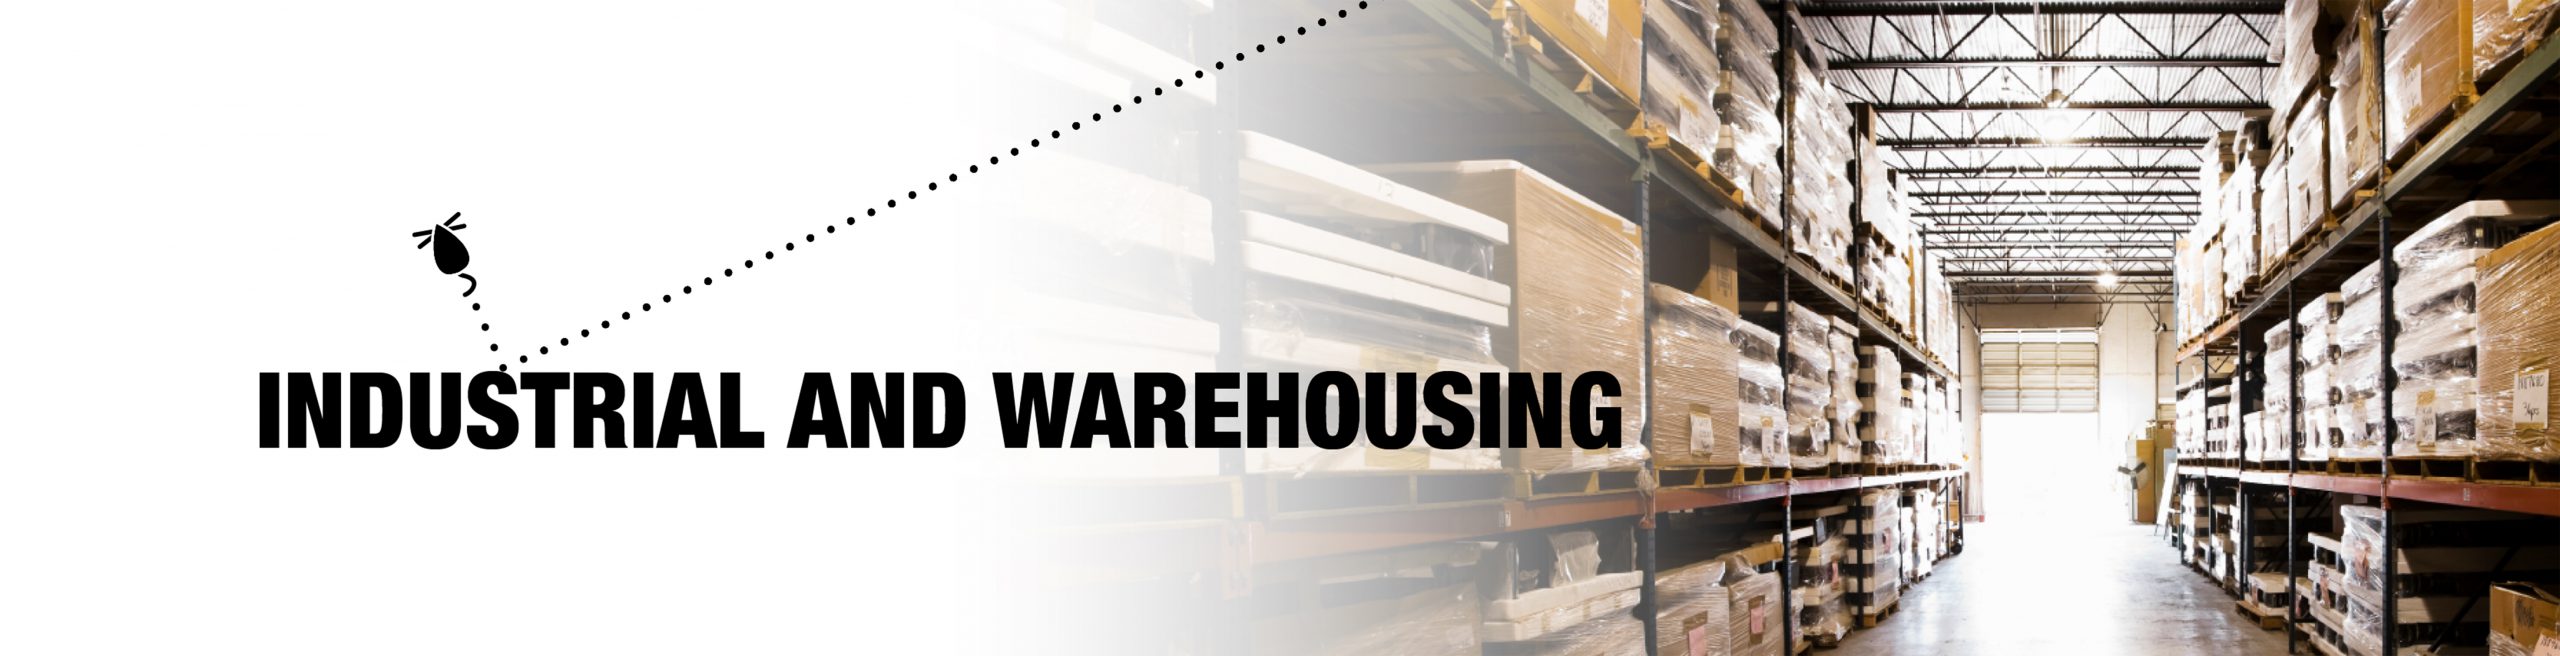 Industrial and Warehousing header with an image of a warehouse